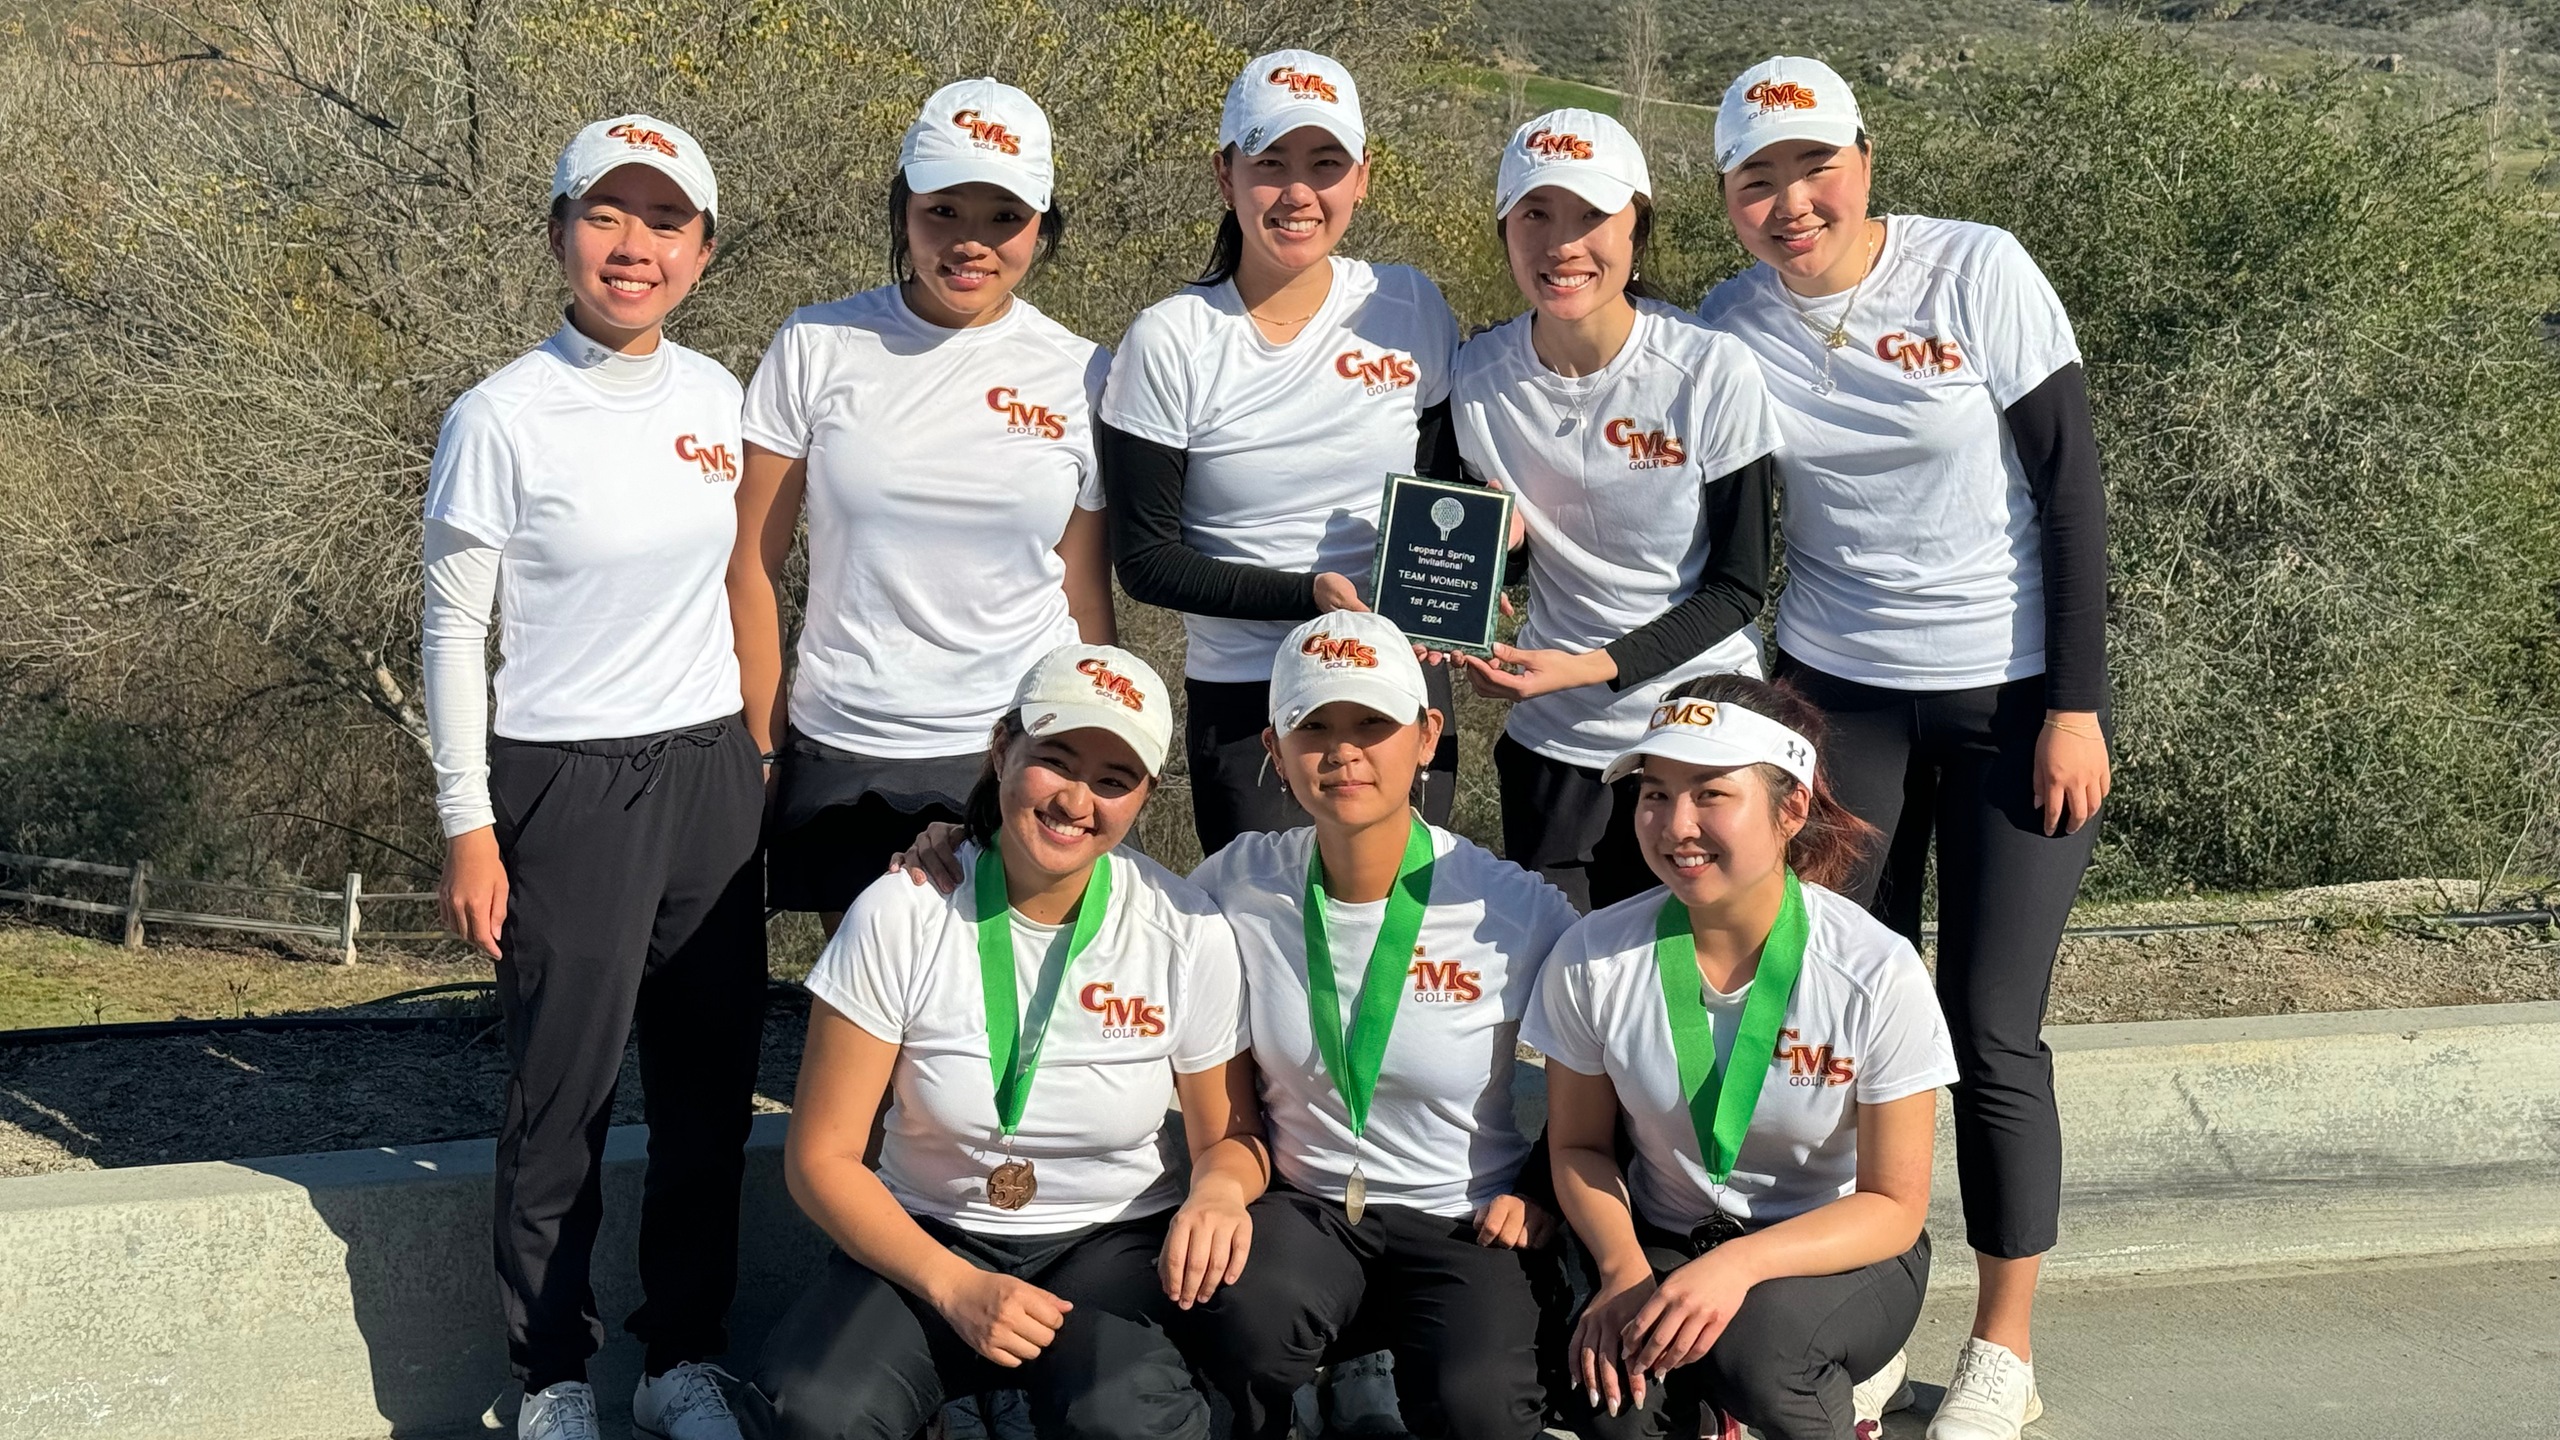 CMS women's golf took first at the Leopard Spring Invitational